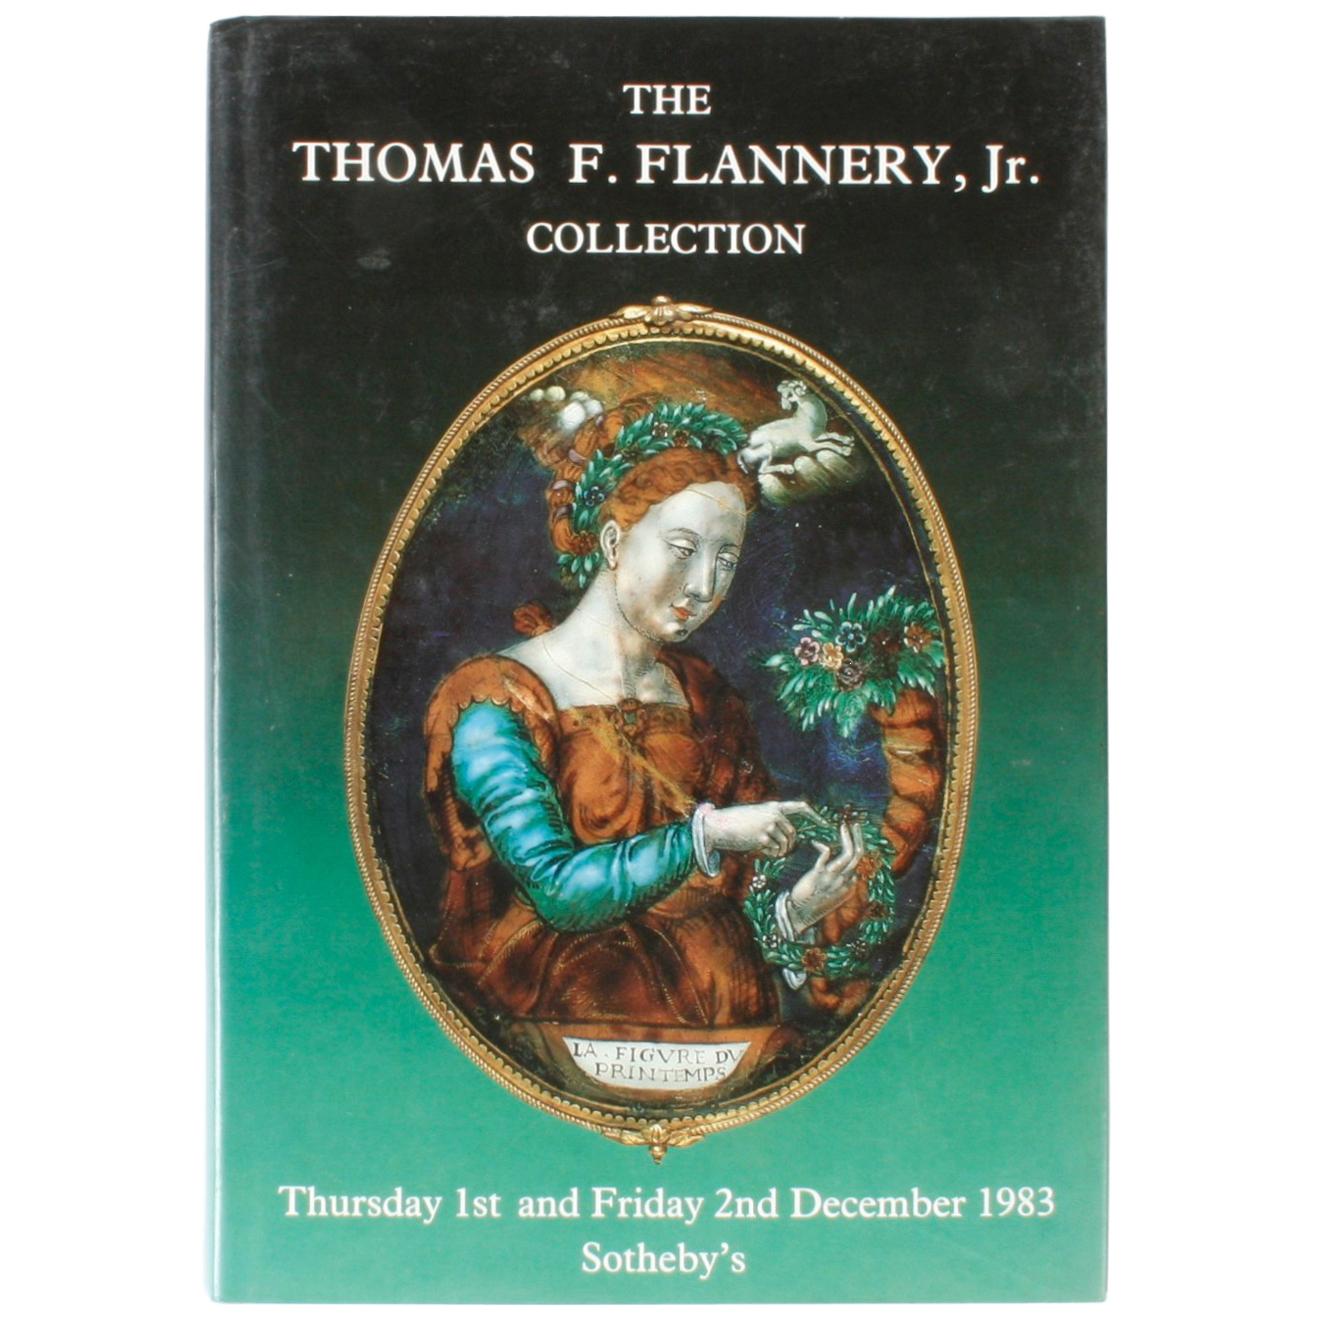 Sotheby's London, The Thomas F. Flannery, Jr. Collection